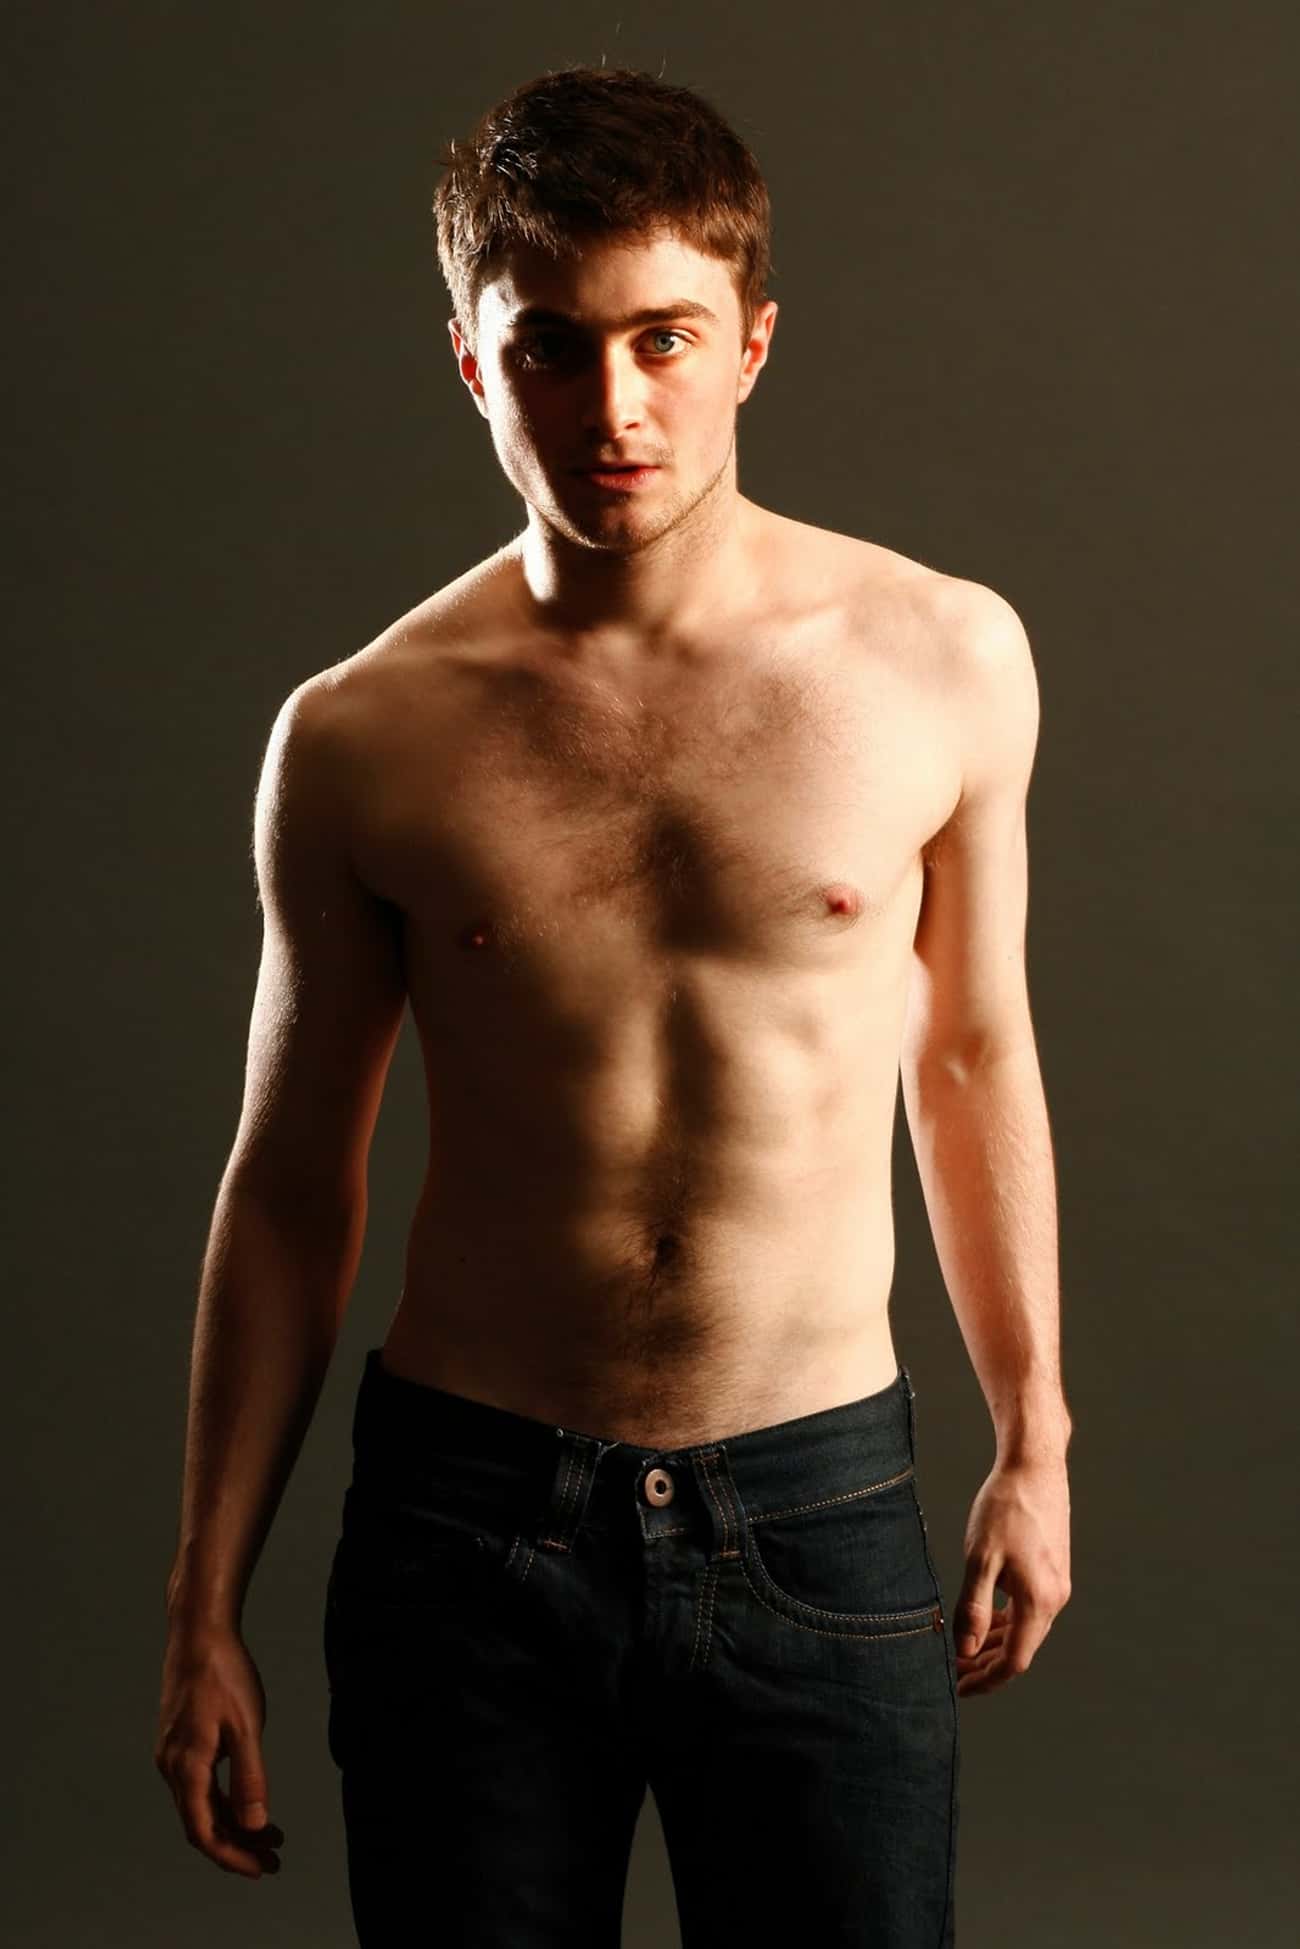 Daniel Radcliffe in Shirtless with Skinny Jeans